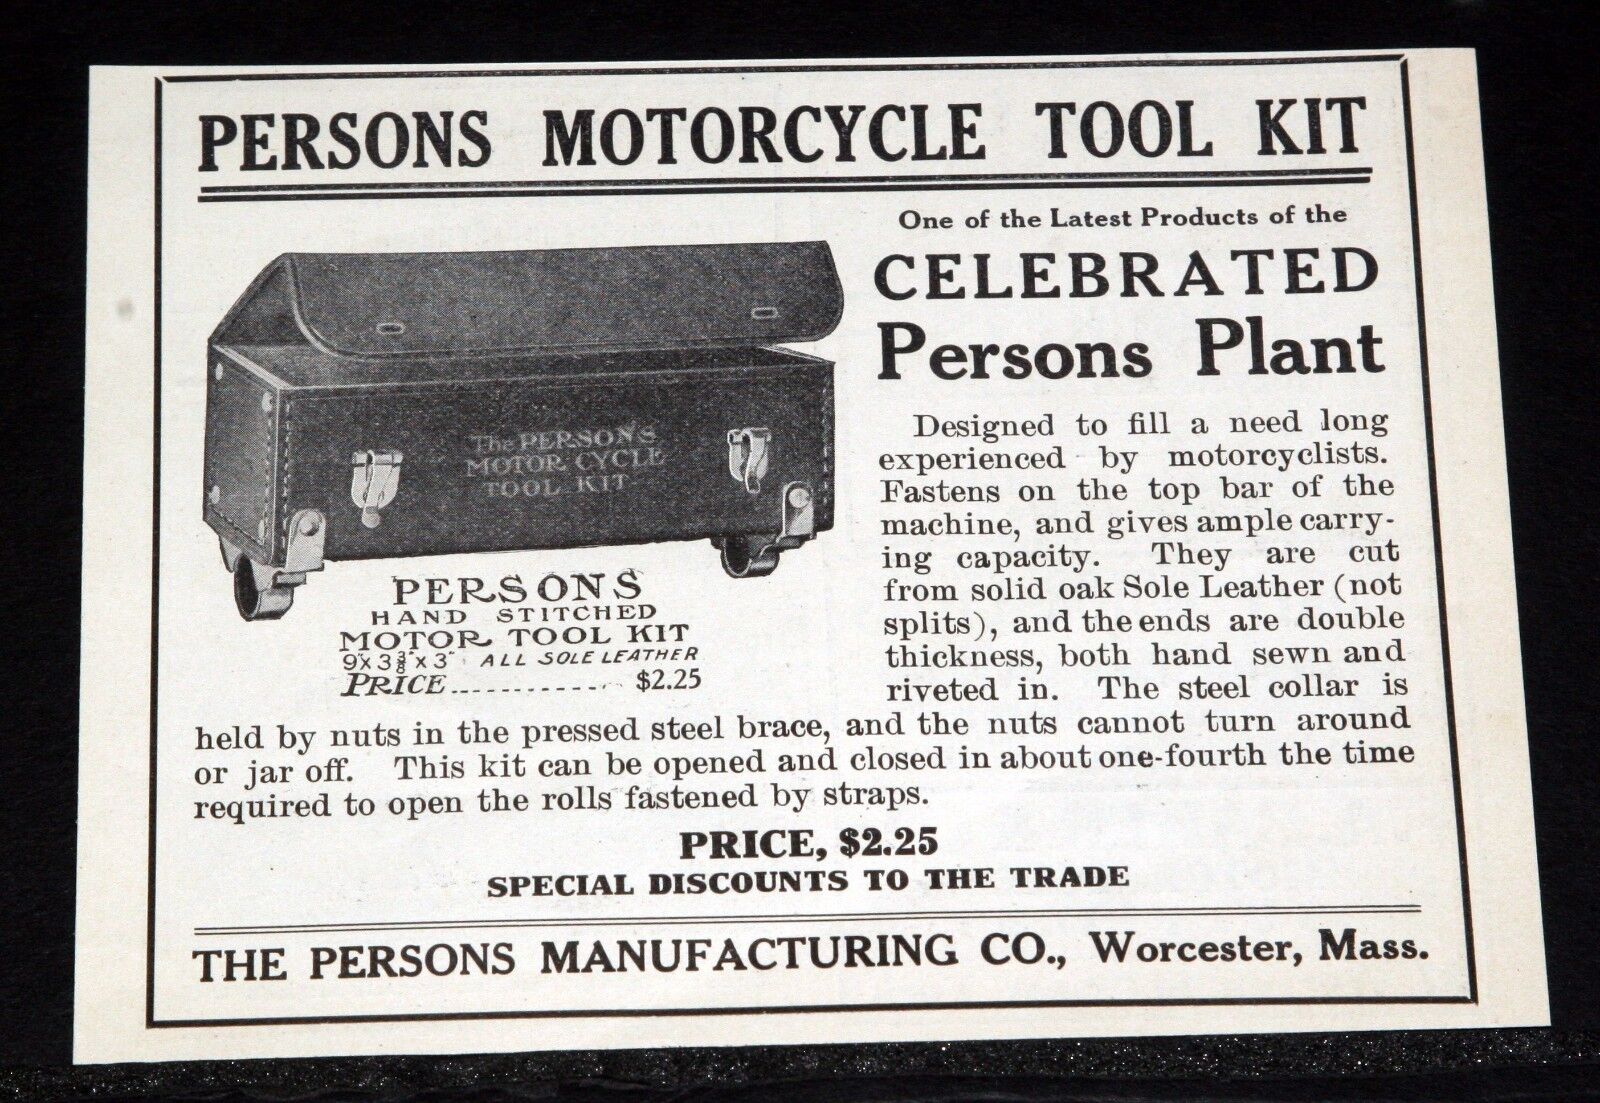 1908 Old Magazine Print Ad, Persons Motorcycle Tool Kit, Hand Stitched Leather!